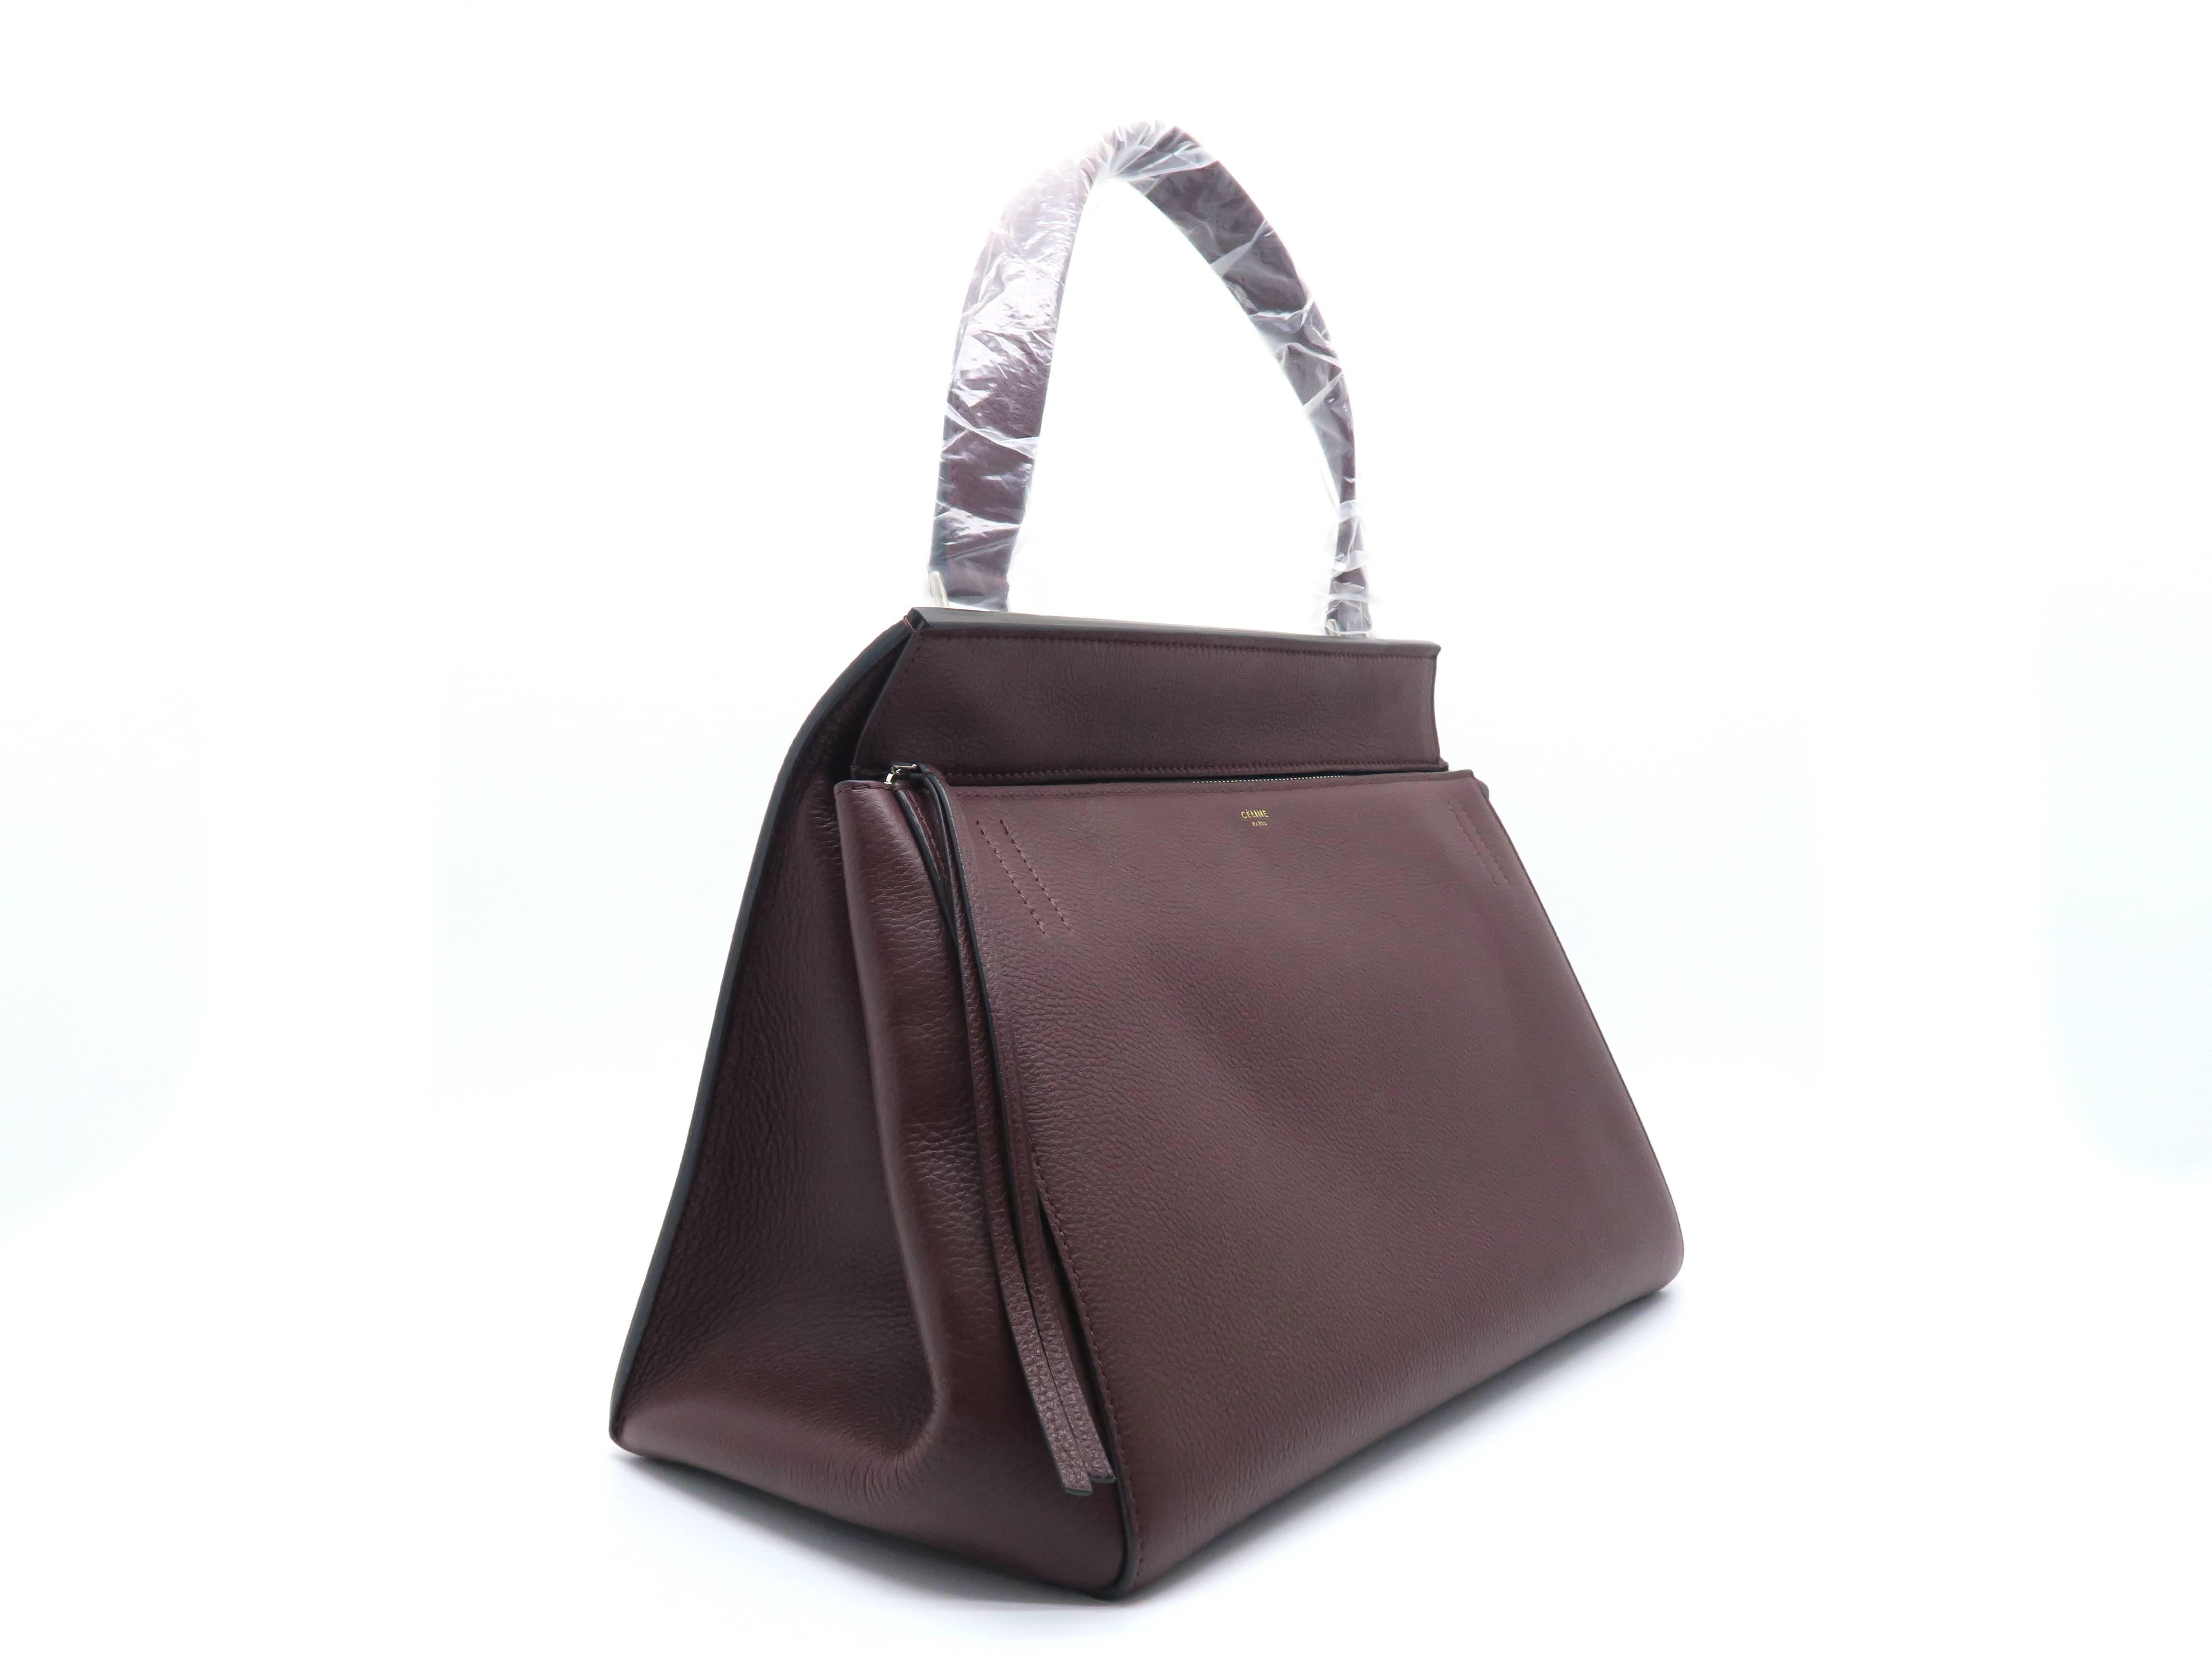 Color: Wine Red

Material: Calfskin Leather 

Condition: Rank N
Overall: Brand New
Surface: Good
Corners: Good
Edges: Good
Handles/Straps: Good
Hardware: Good

Dimensions: W33 × H26 × D18cm（W12.9" × H10.2" × D7.0"）
Shoulder strap: